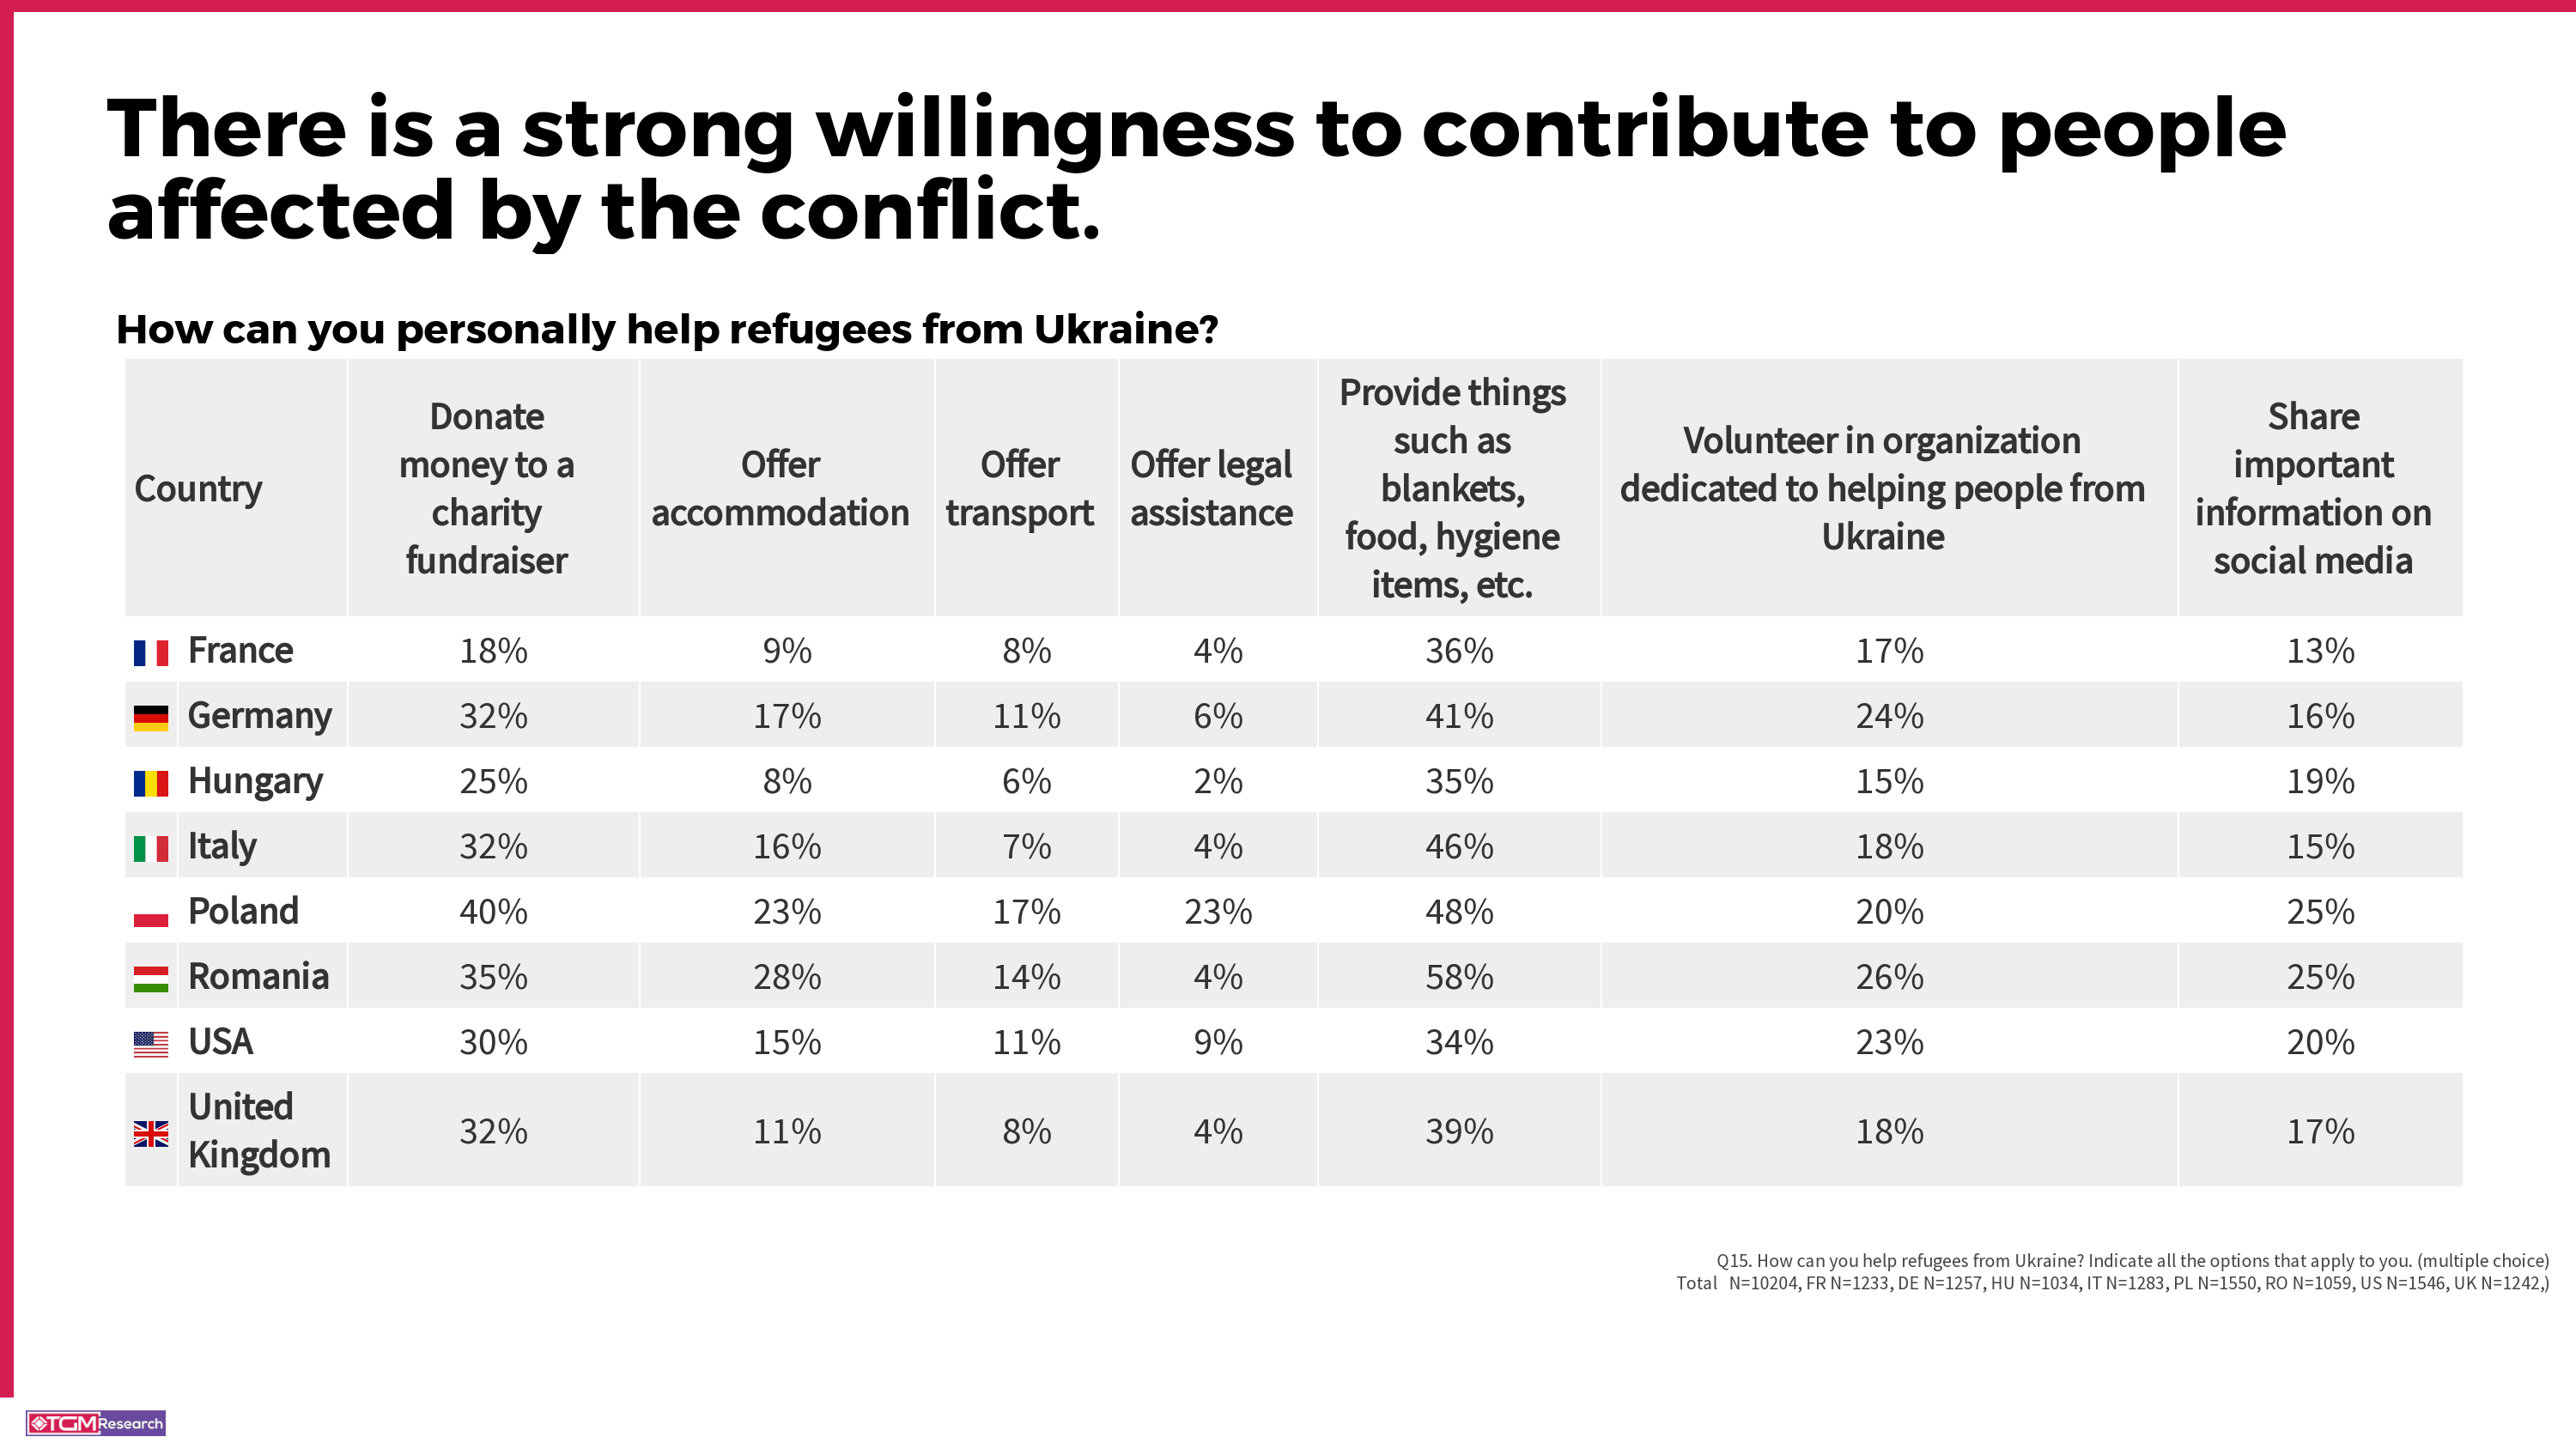 TGM Survey results on Russia-Ukraine conflict - Support from society